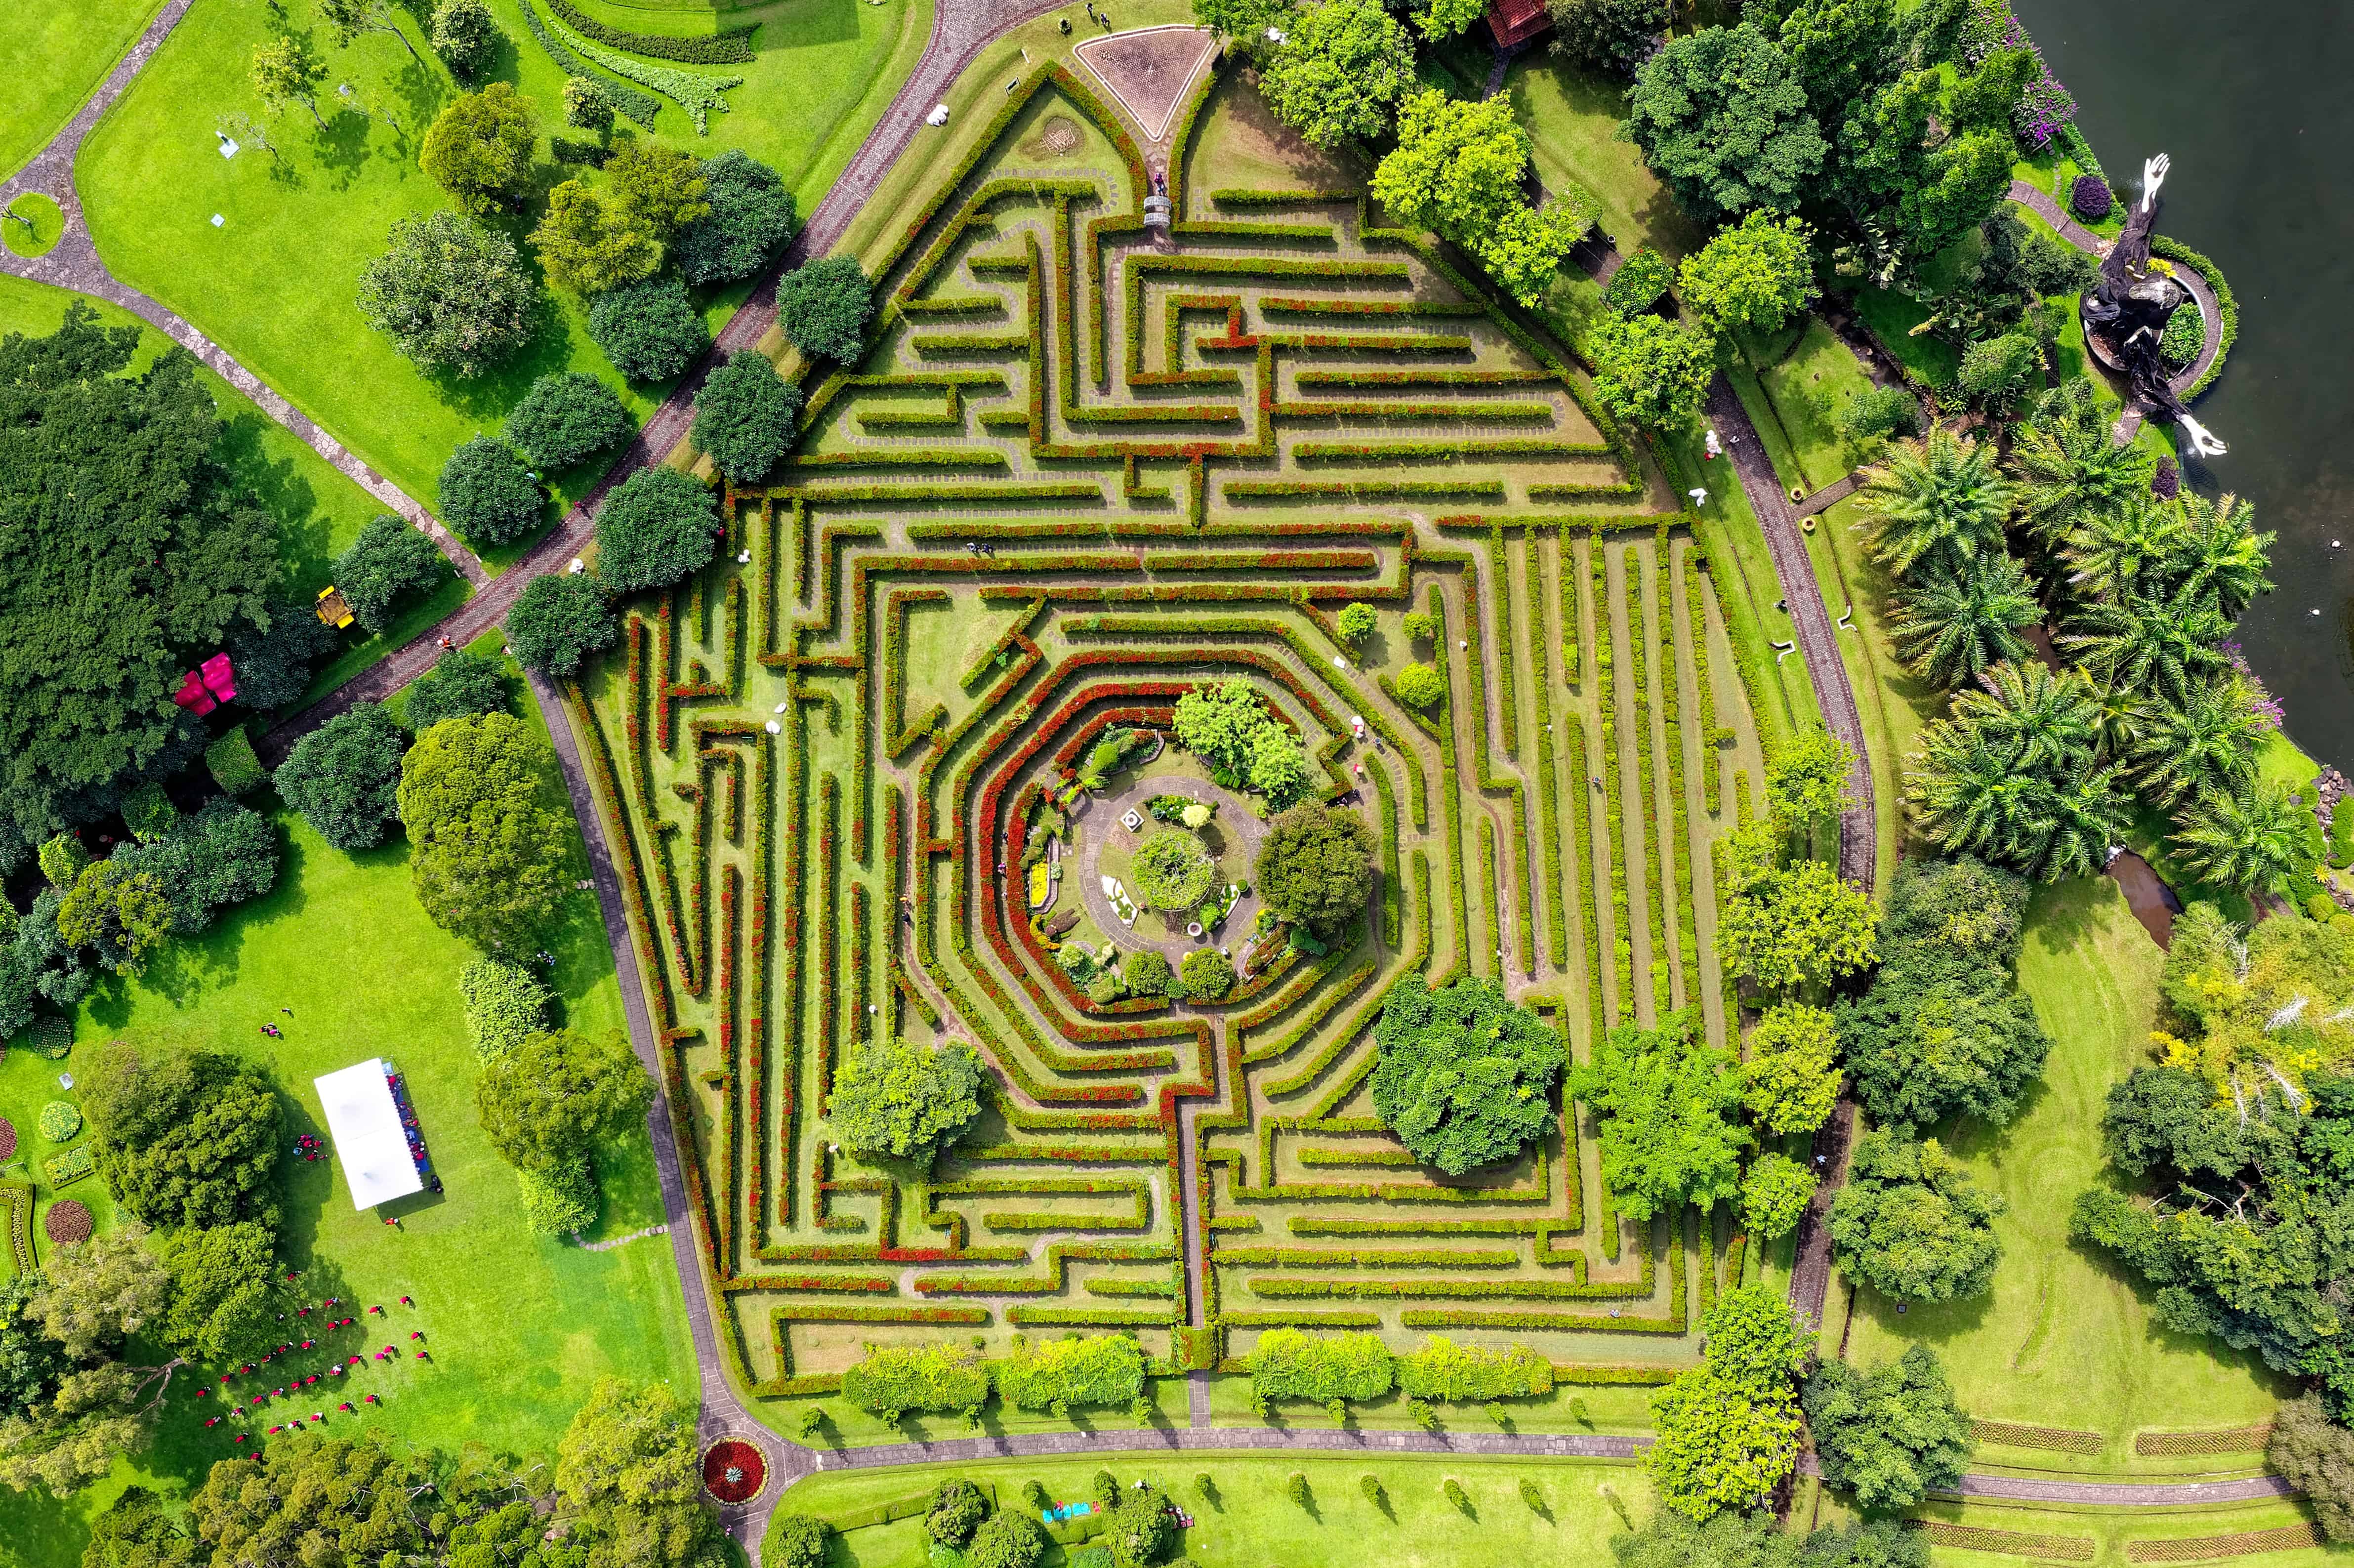 A birds eye view over a large hedge maze